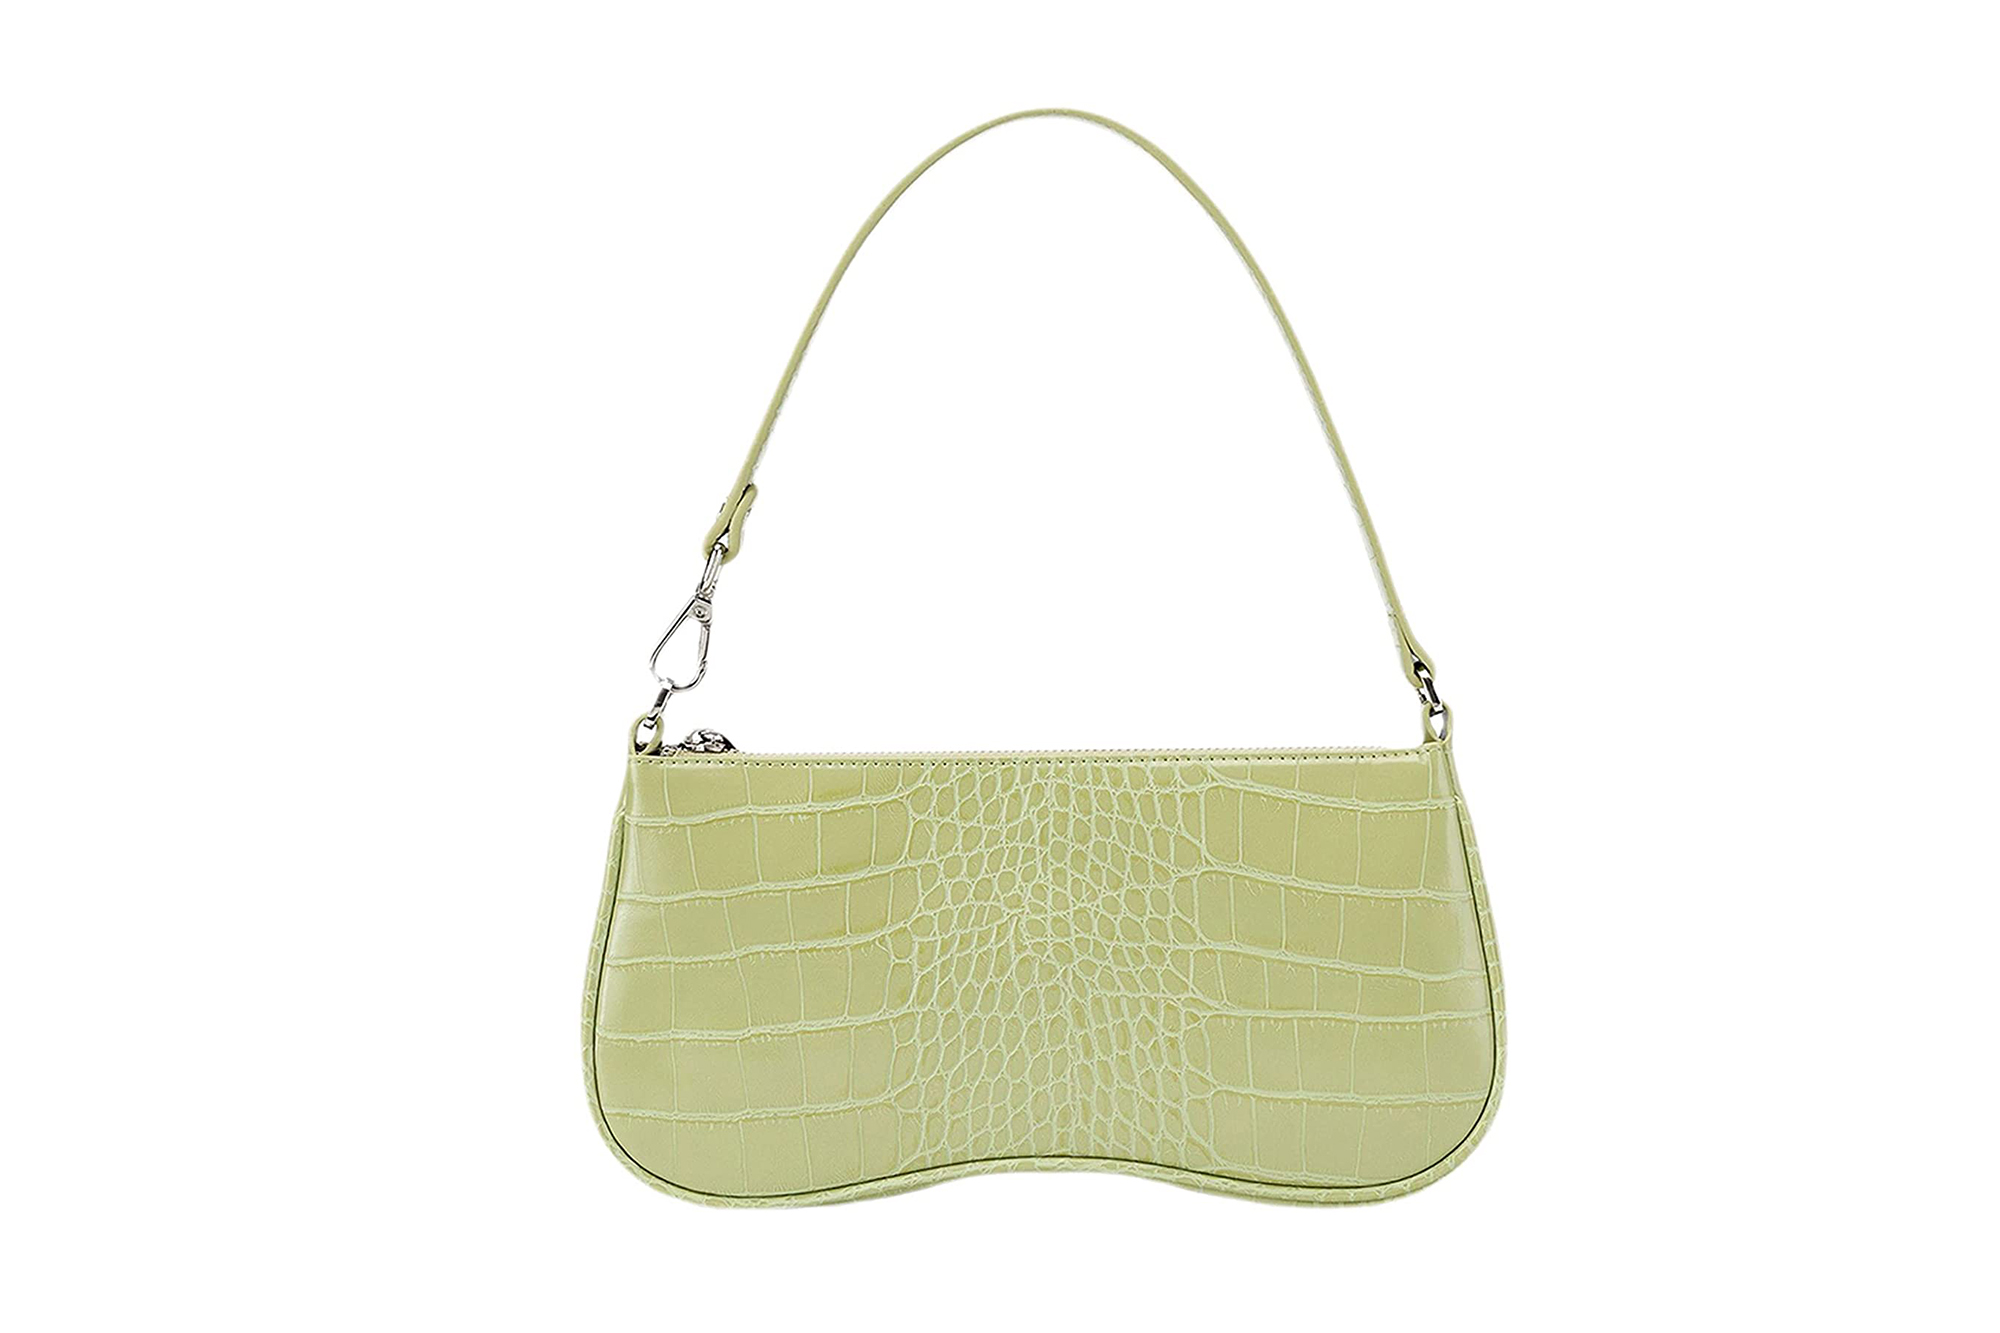 Throw It Back to the '90s With This Chic Crocodile Print Purse